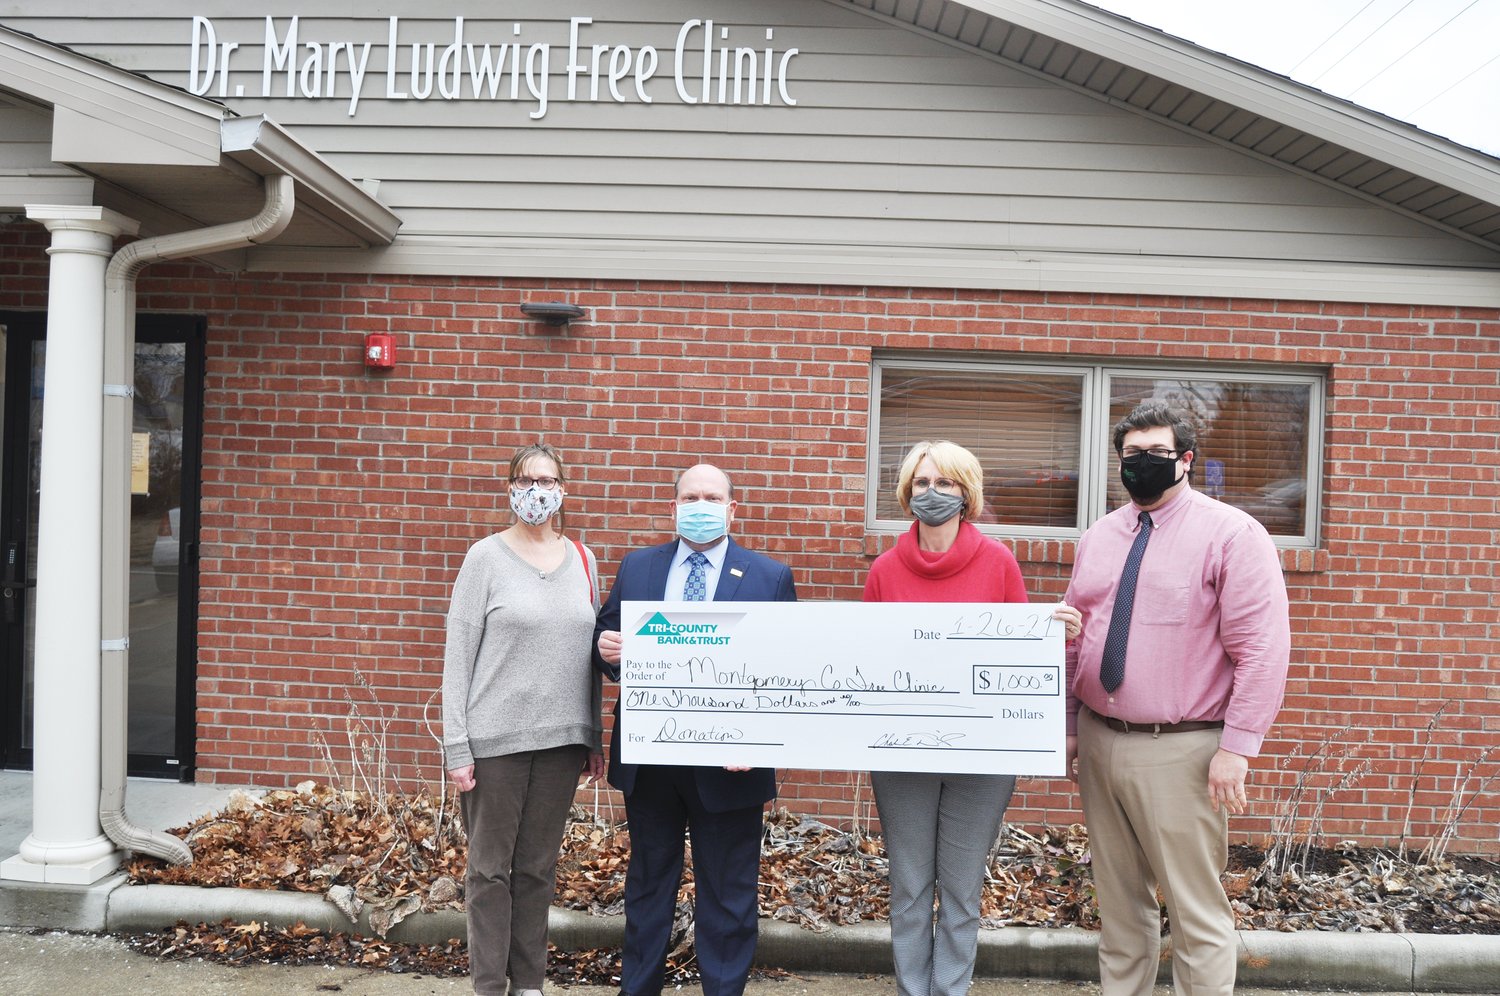 Tri-County Bank & Trust will donate $1,000 annually over the next five years to the Montgomery County Free Clinic. This year’s donation will cover operating expenses and some technology needs including updating laptop computers, executive director Kay Nannet said. The clinic has seen an increase in patients during the COVID-19 pandemic, such as in the dental clinic. A new dental hygienist has been hired. Pictured from left are Nannet; Steve McLaughlin, Tri-County vice president of business development; Donna Hendrickson, clinic board president; and Brandon Peacock, Tri-County South Boulevard branch manager.